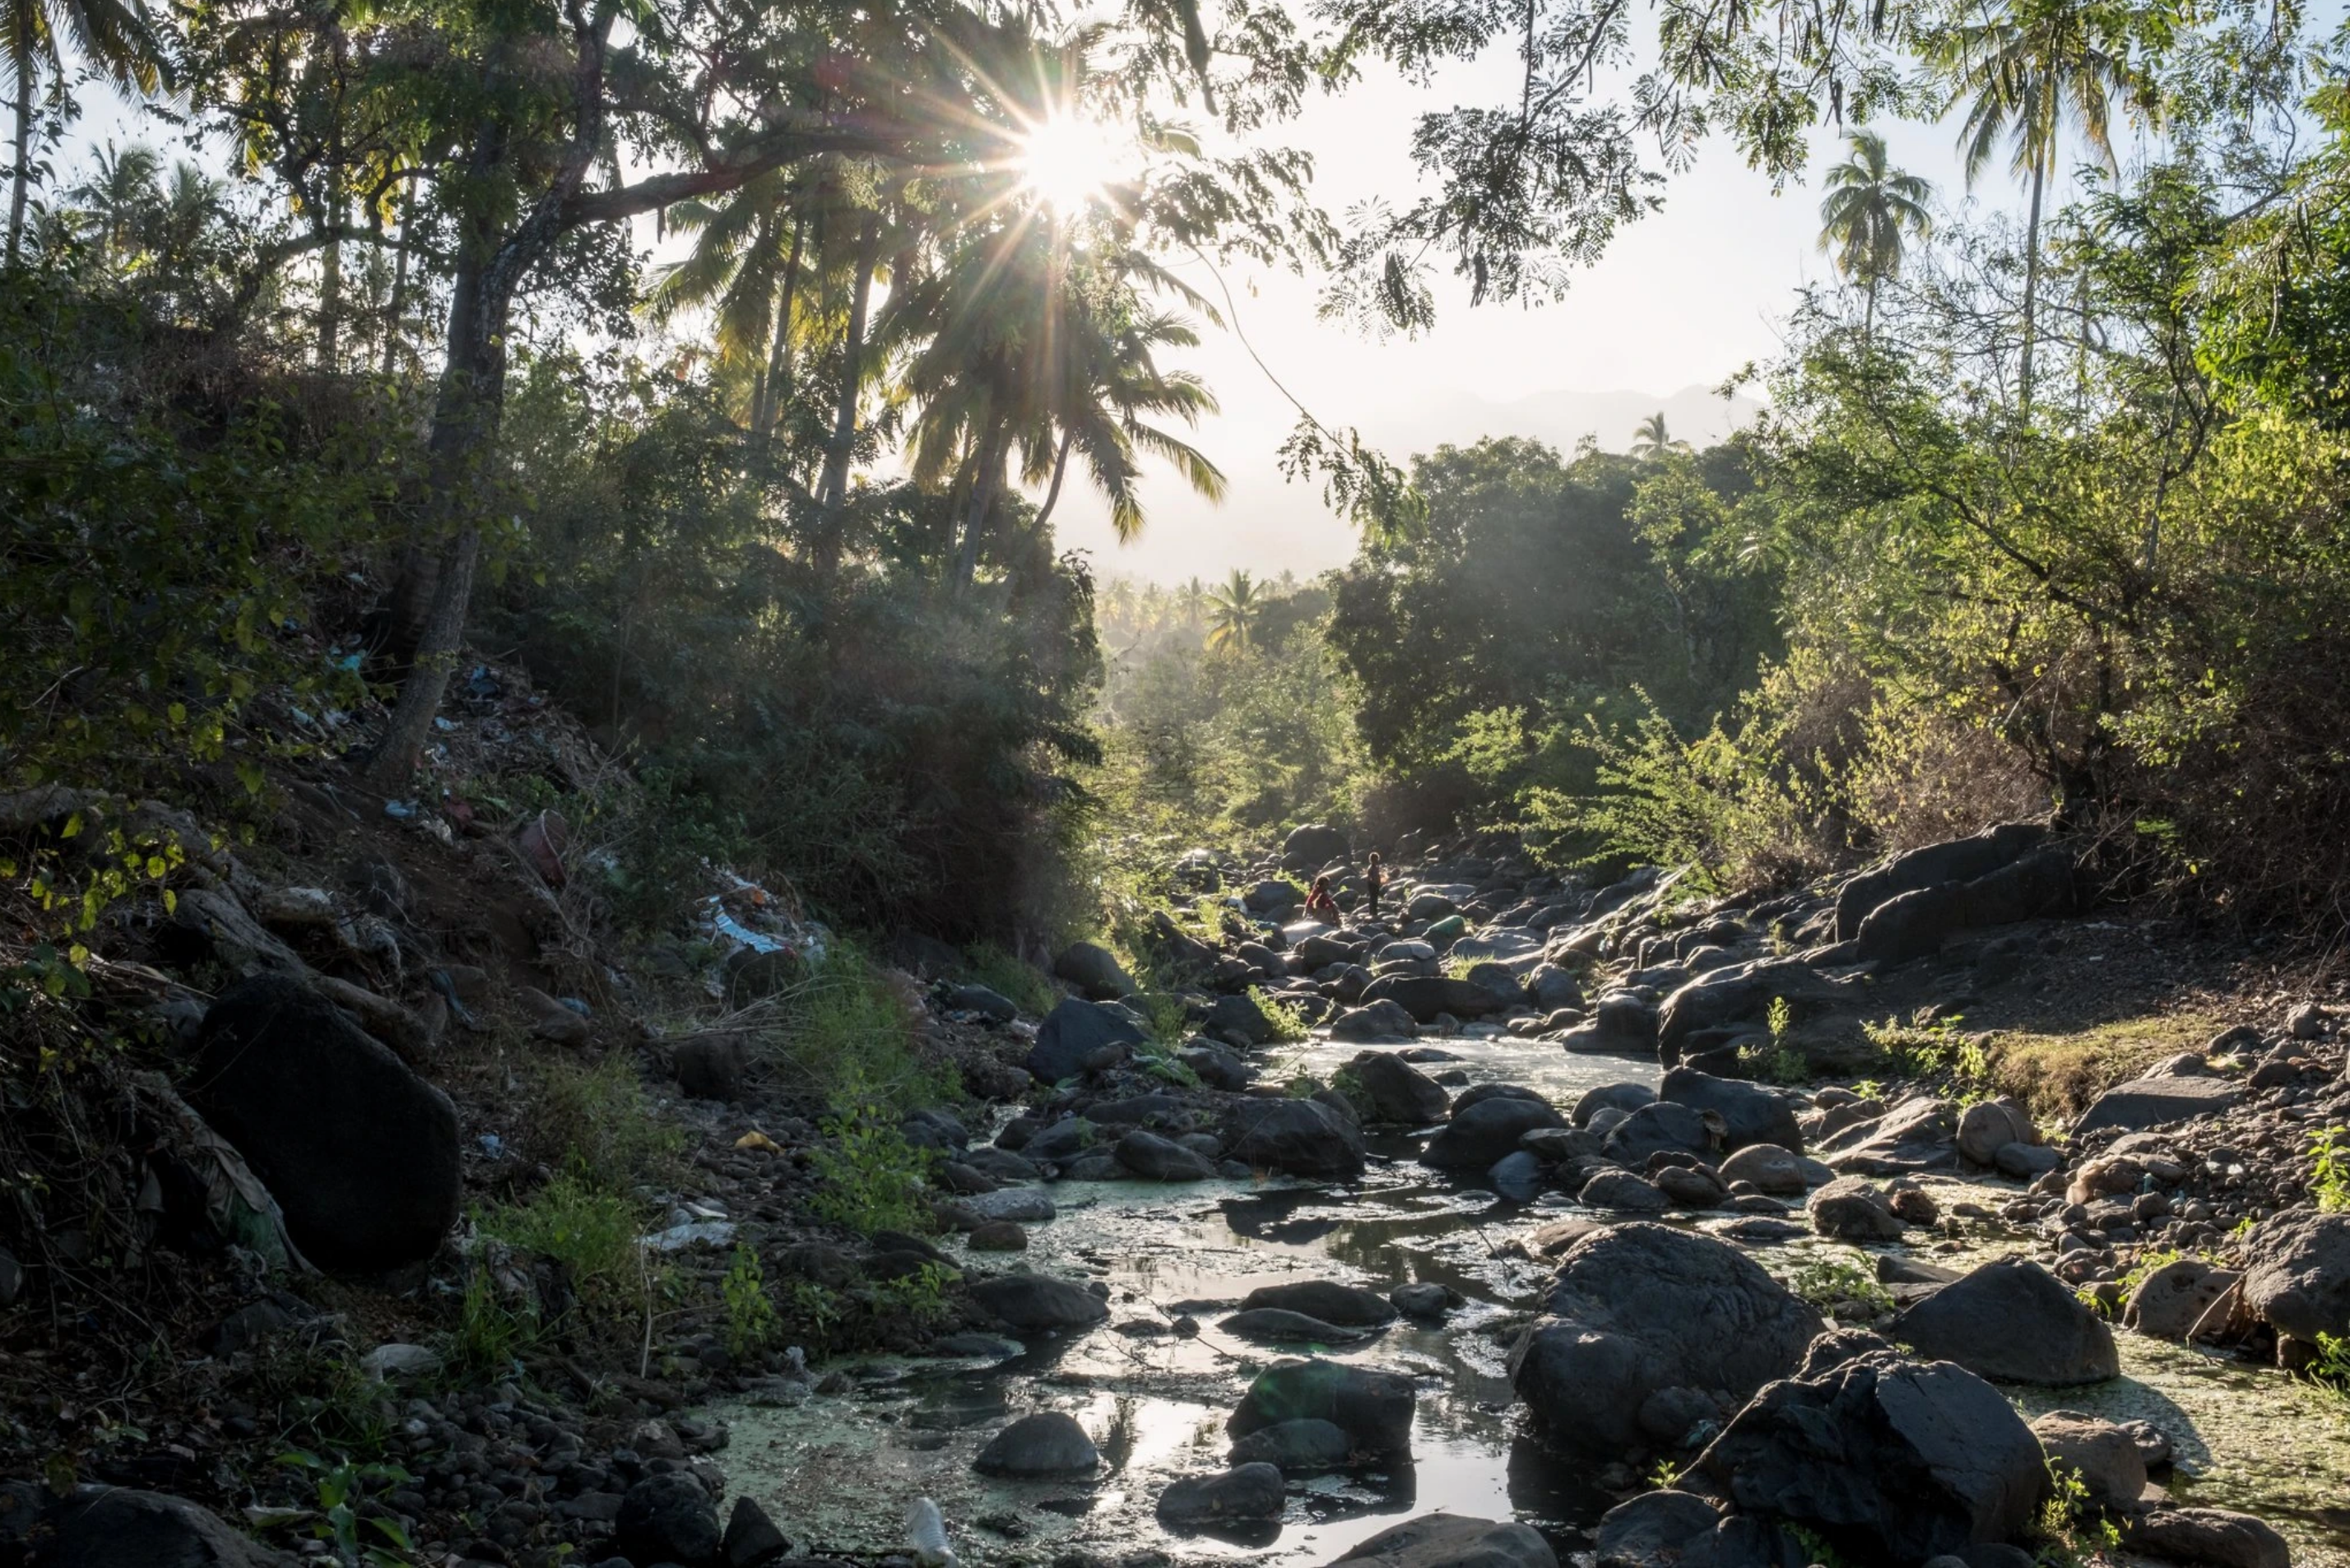 The trickle of a once-potent river on the island of Anjouan, in the Comoros. Image by Tommy Trenchard for The New York Times. Comoros, 2019.